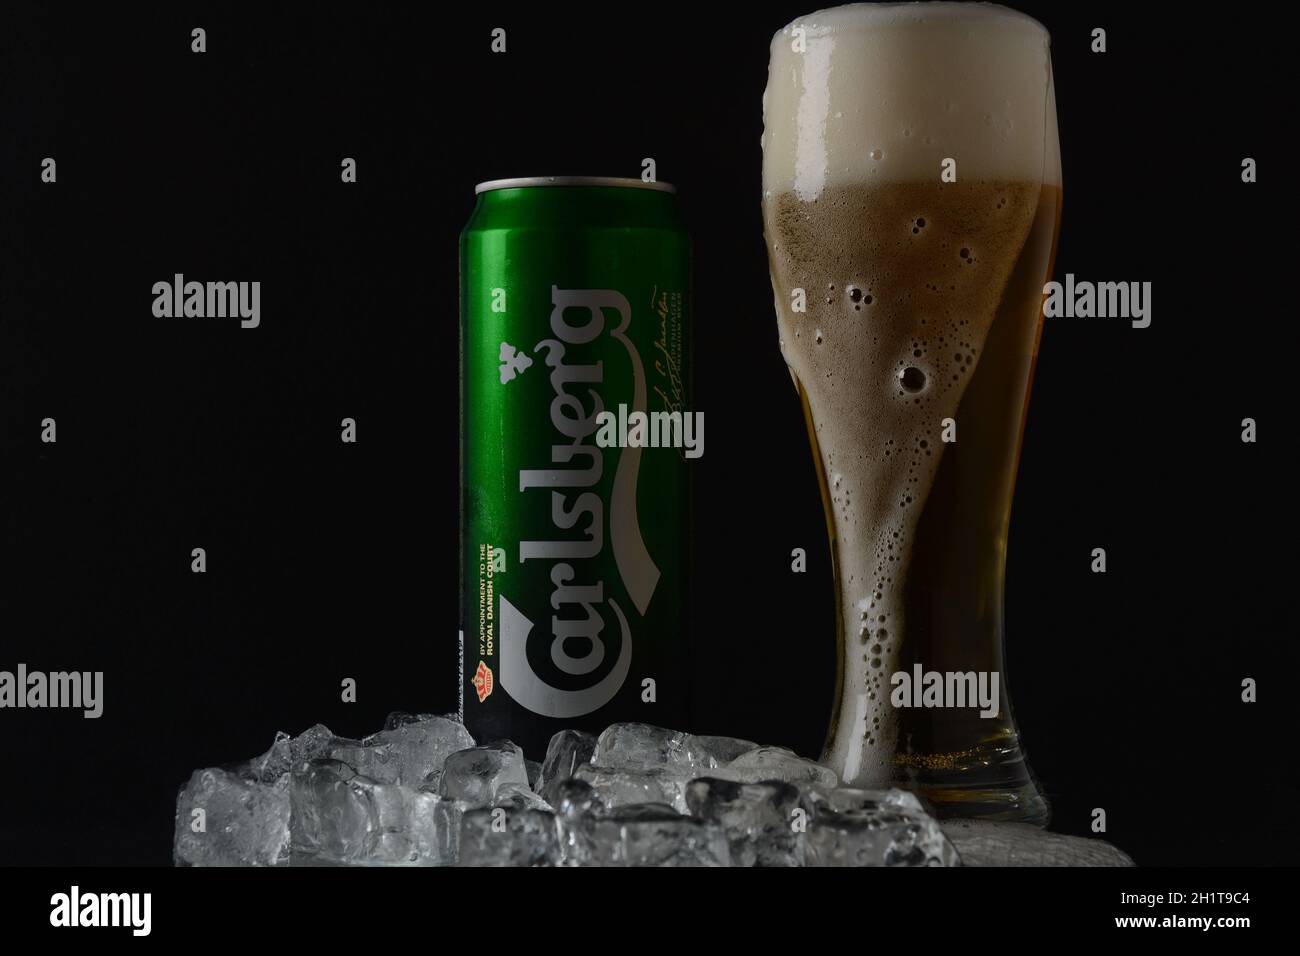 NETANYA,ISRAEL- June 29, 2020: Cold glass and aluminium can of Carlsberg beer black background. Danish brewing company founded in 1847. Stock Photo